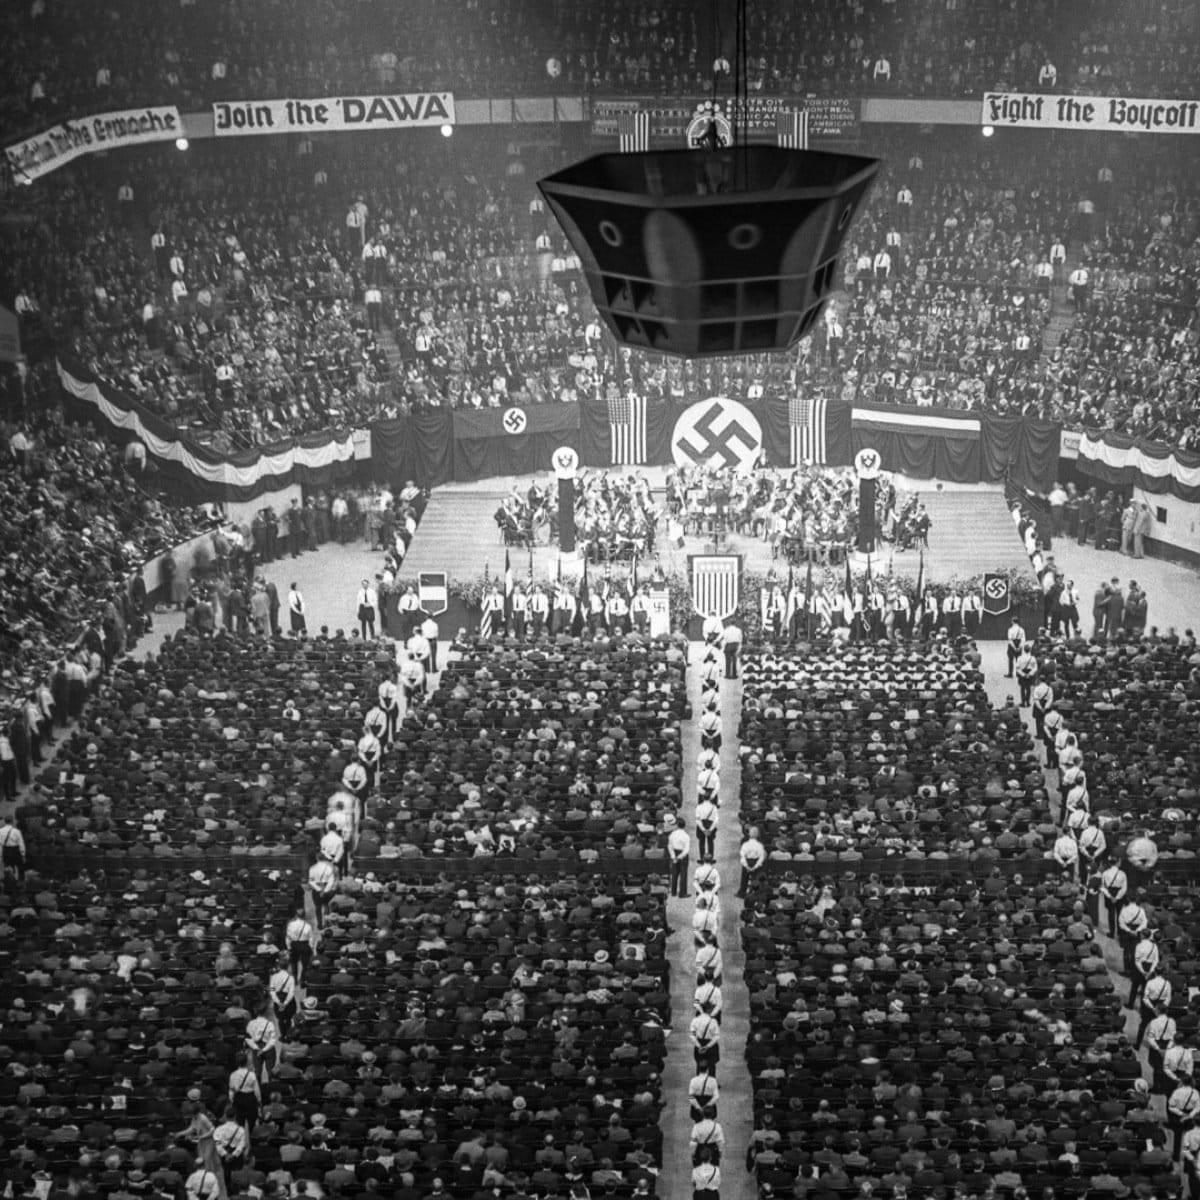 This is a reminder that there were a lot of nazi sympathizers in the US during the rise of the Third Reich. This is Madison Square Garden, NYC circa May 17, 1934. A mass meeting of members of the Friends of New Germany. Only voting 100% BLUE in November can stop these monsters.